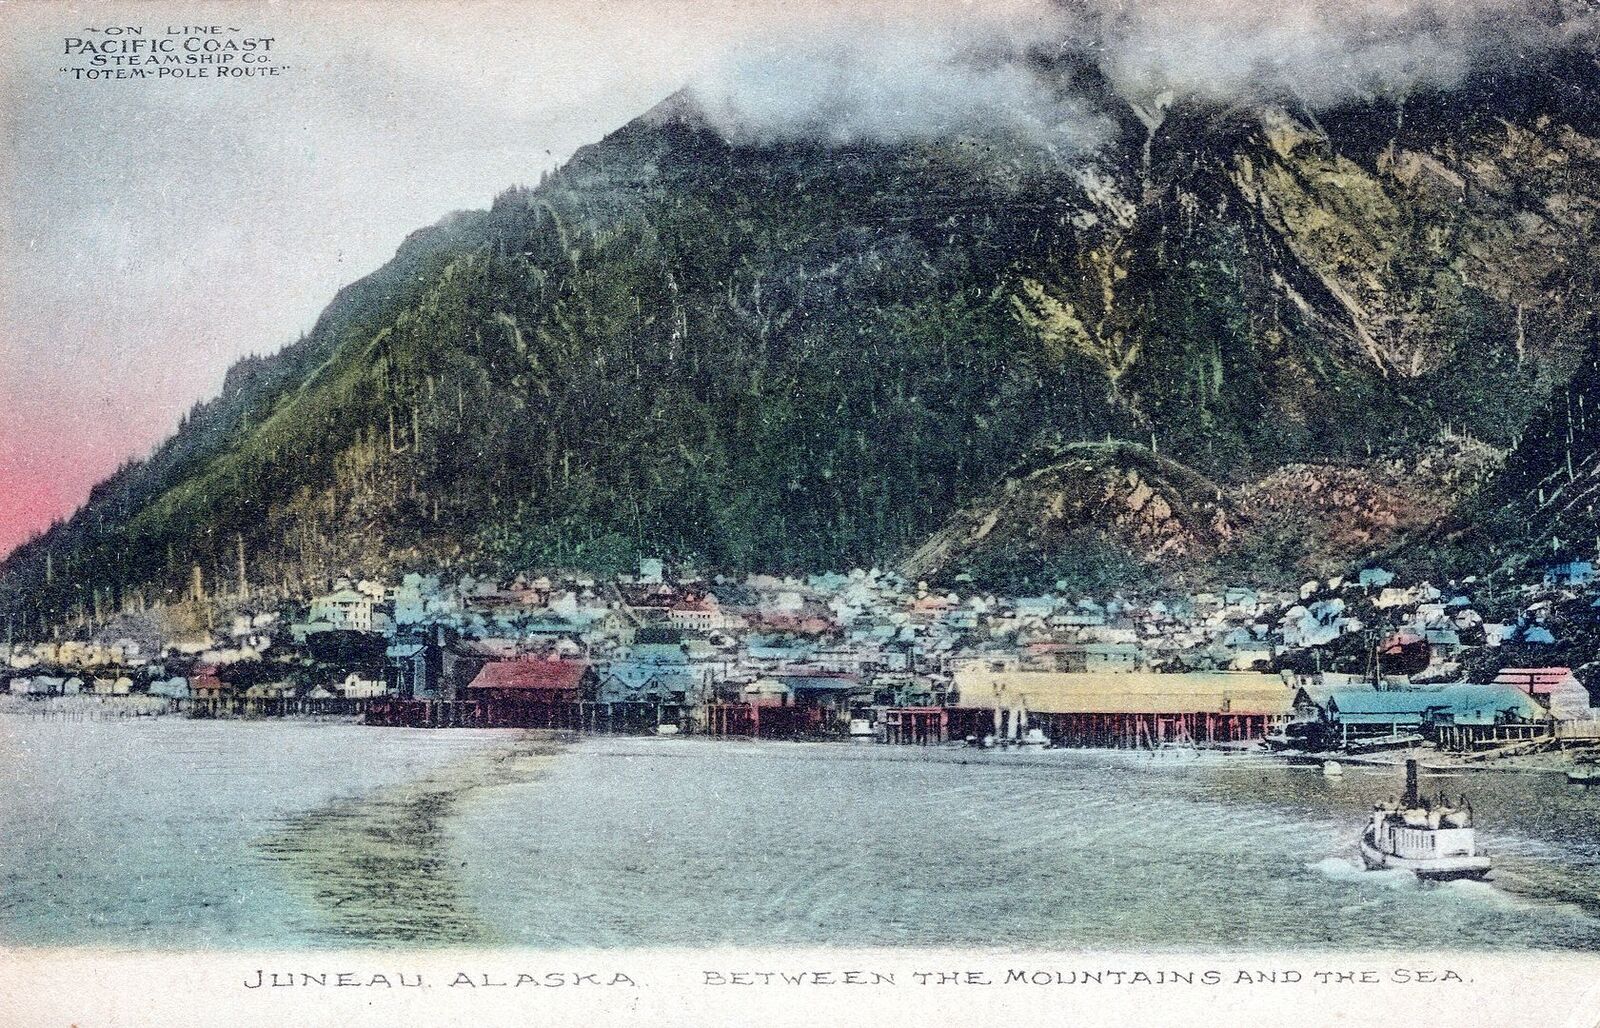 JUNEAU AK-Between The Mountains And Sea Pacific Crest Steamship Totem-Pole Route